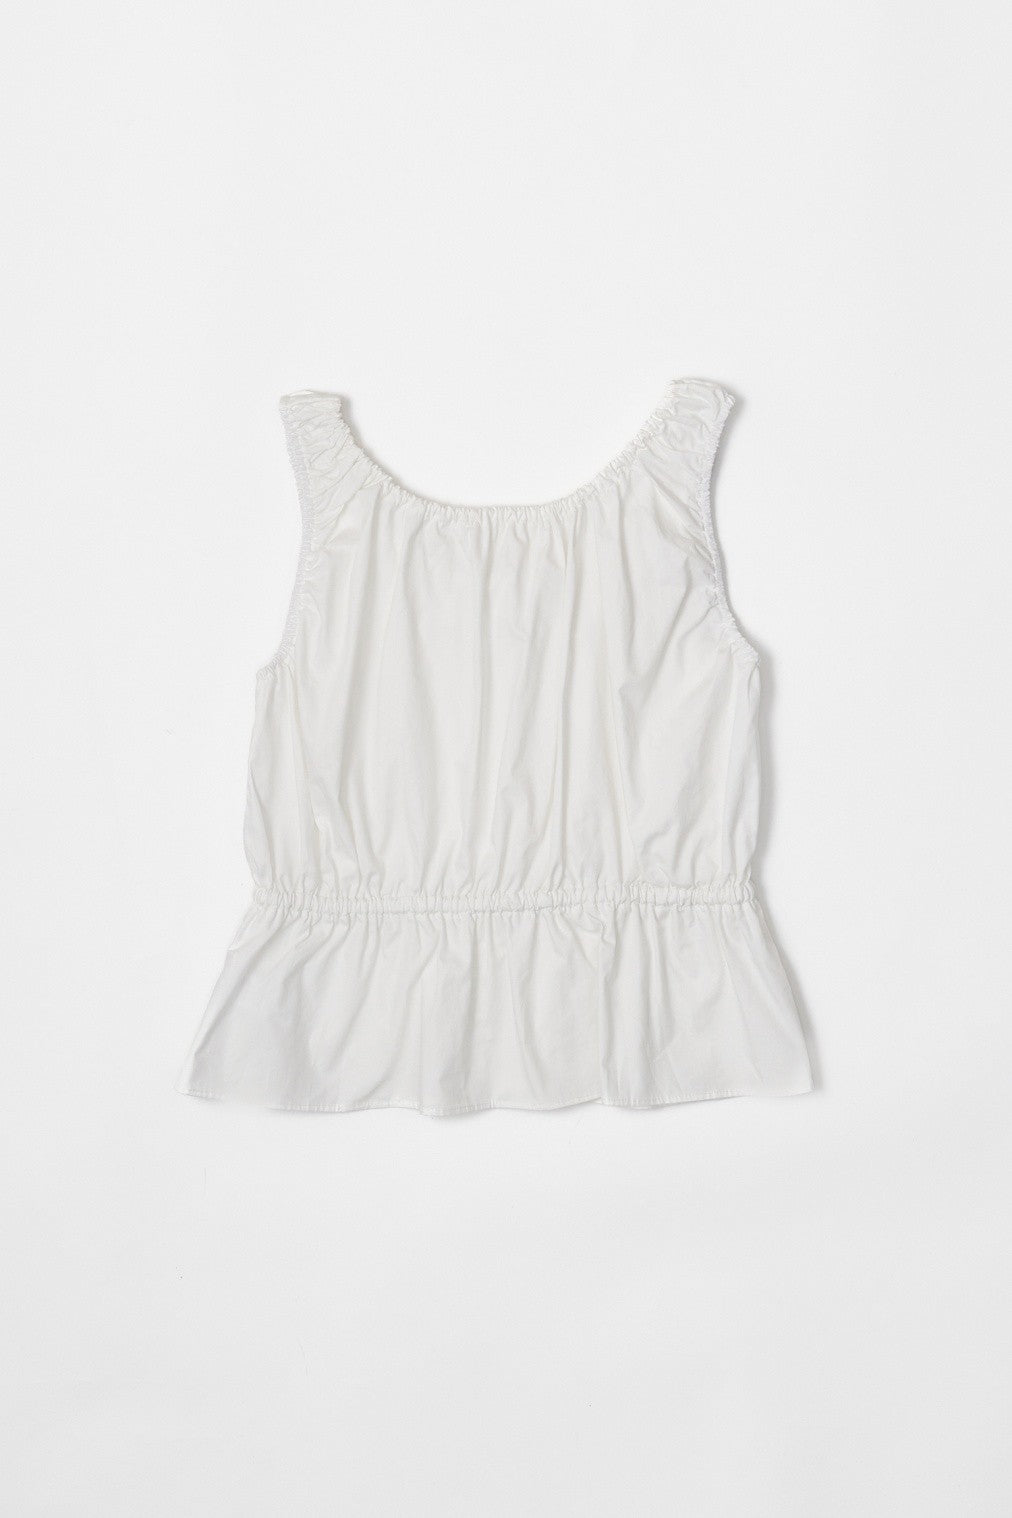 Darla Bow Front Top